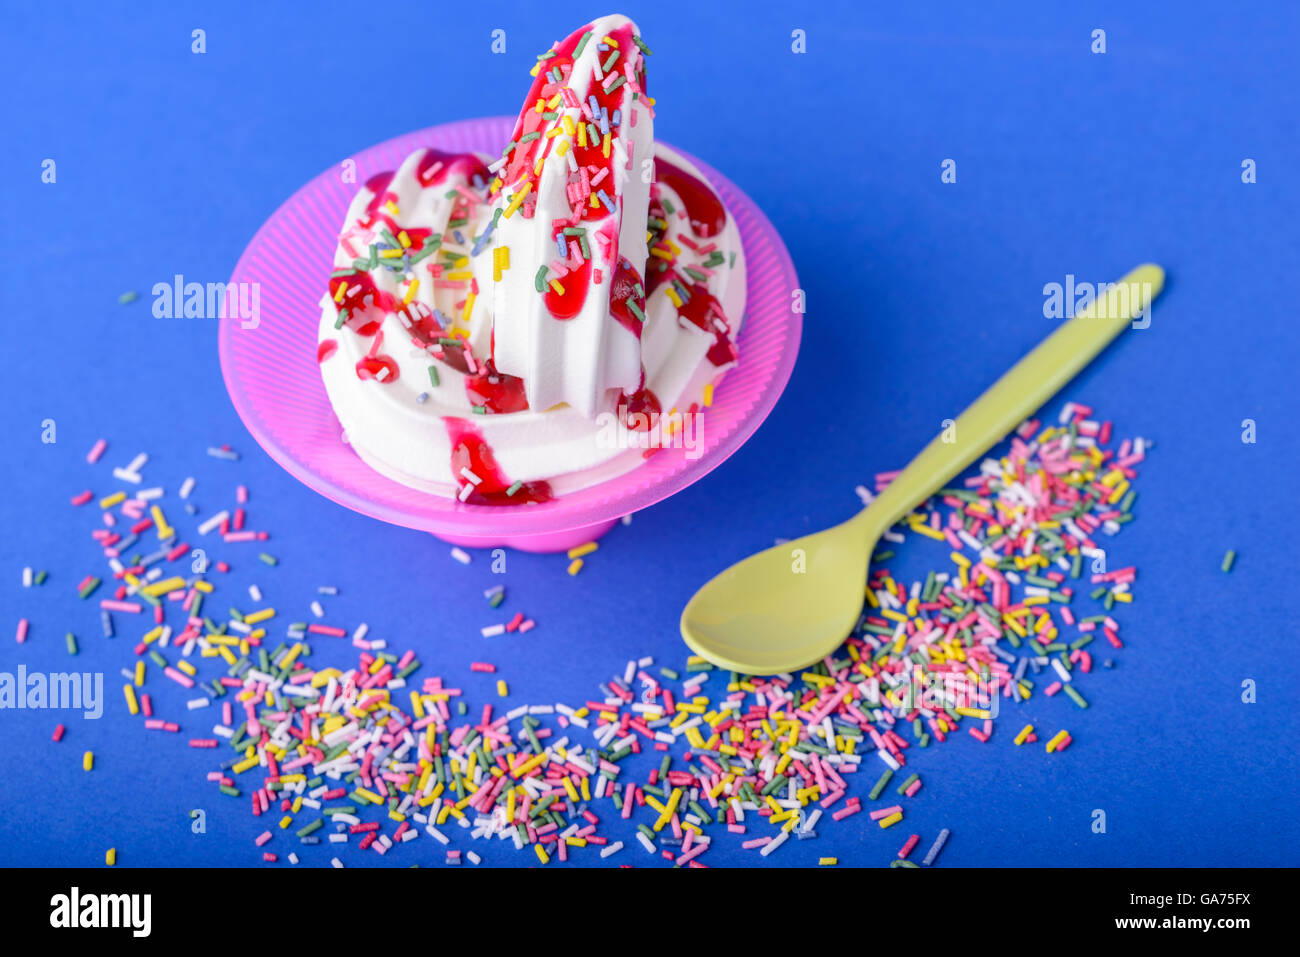 frozen yogurt with black cherry topping and rainbow sprinkles on blue background with yellow spoon and rainbow sprinkles Stock Photo